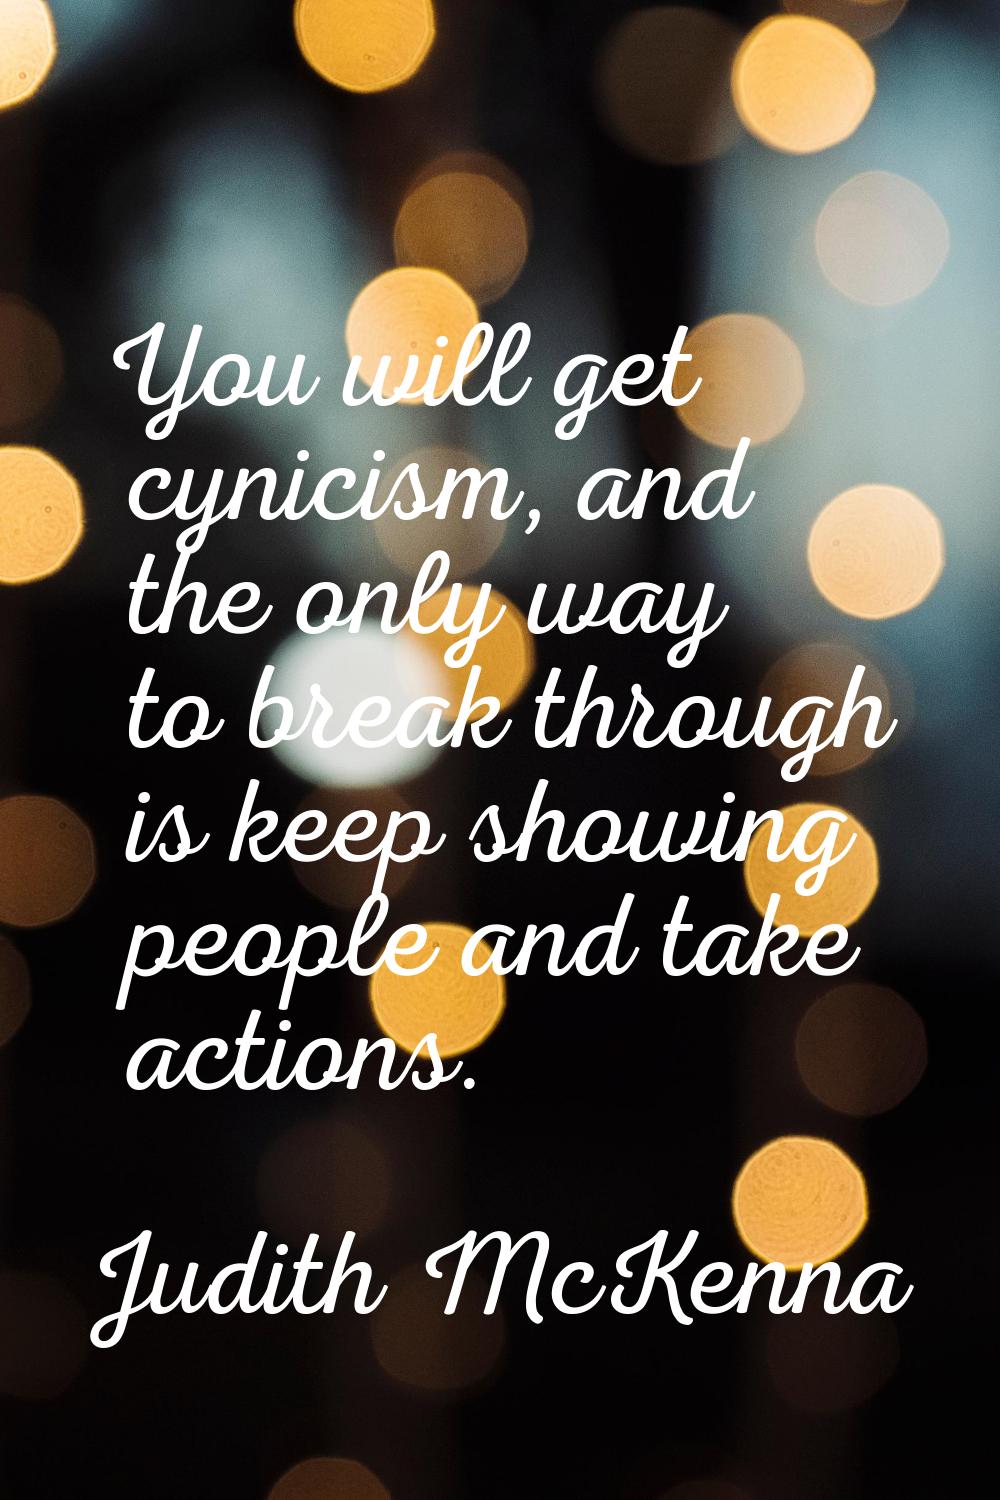 You will get cynicism, and the only way to break through is keep showing people and take actions.